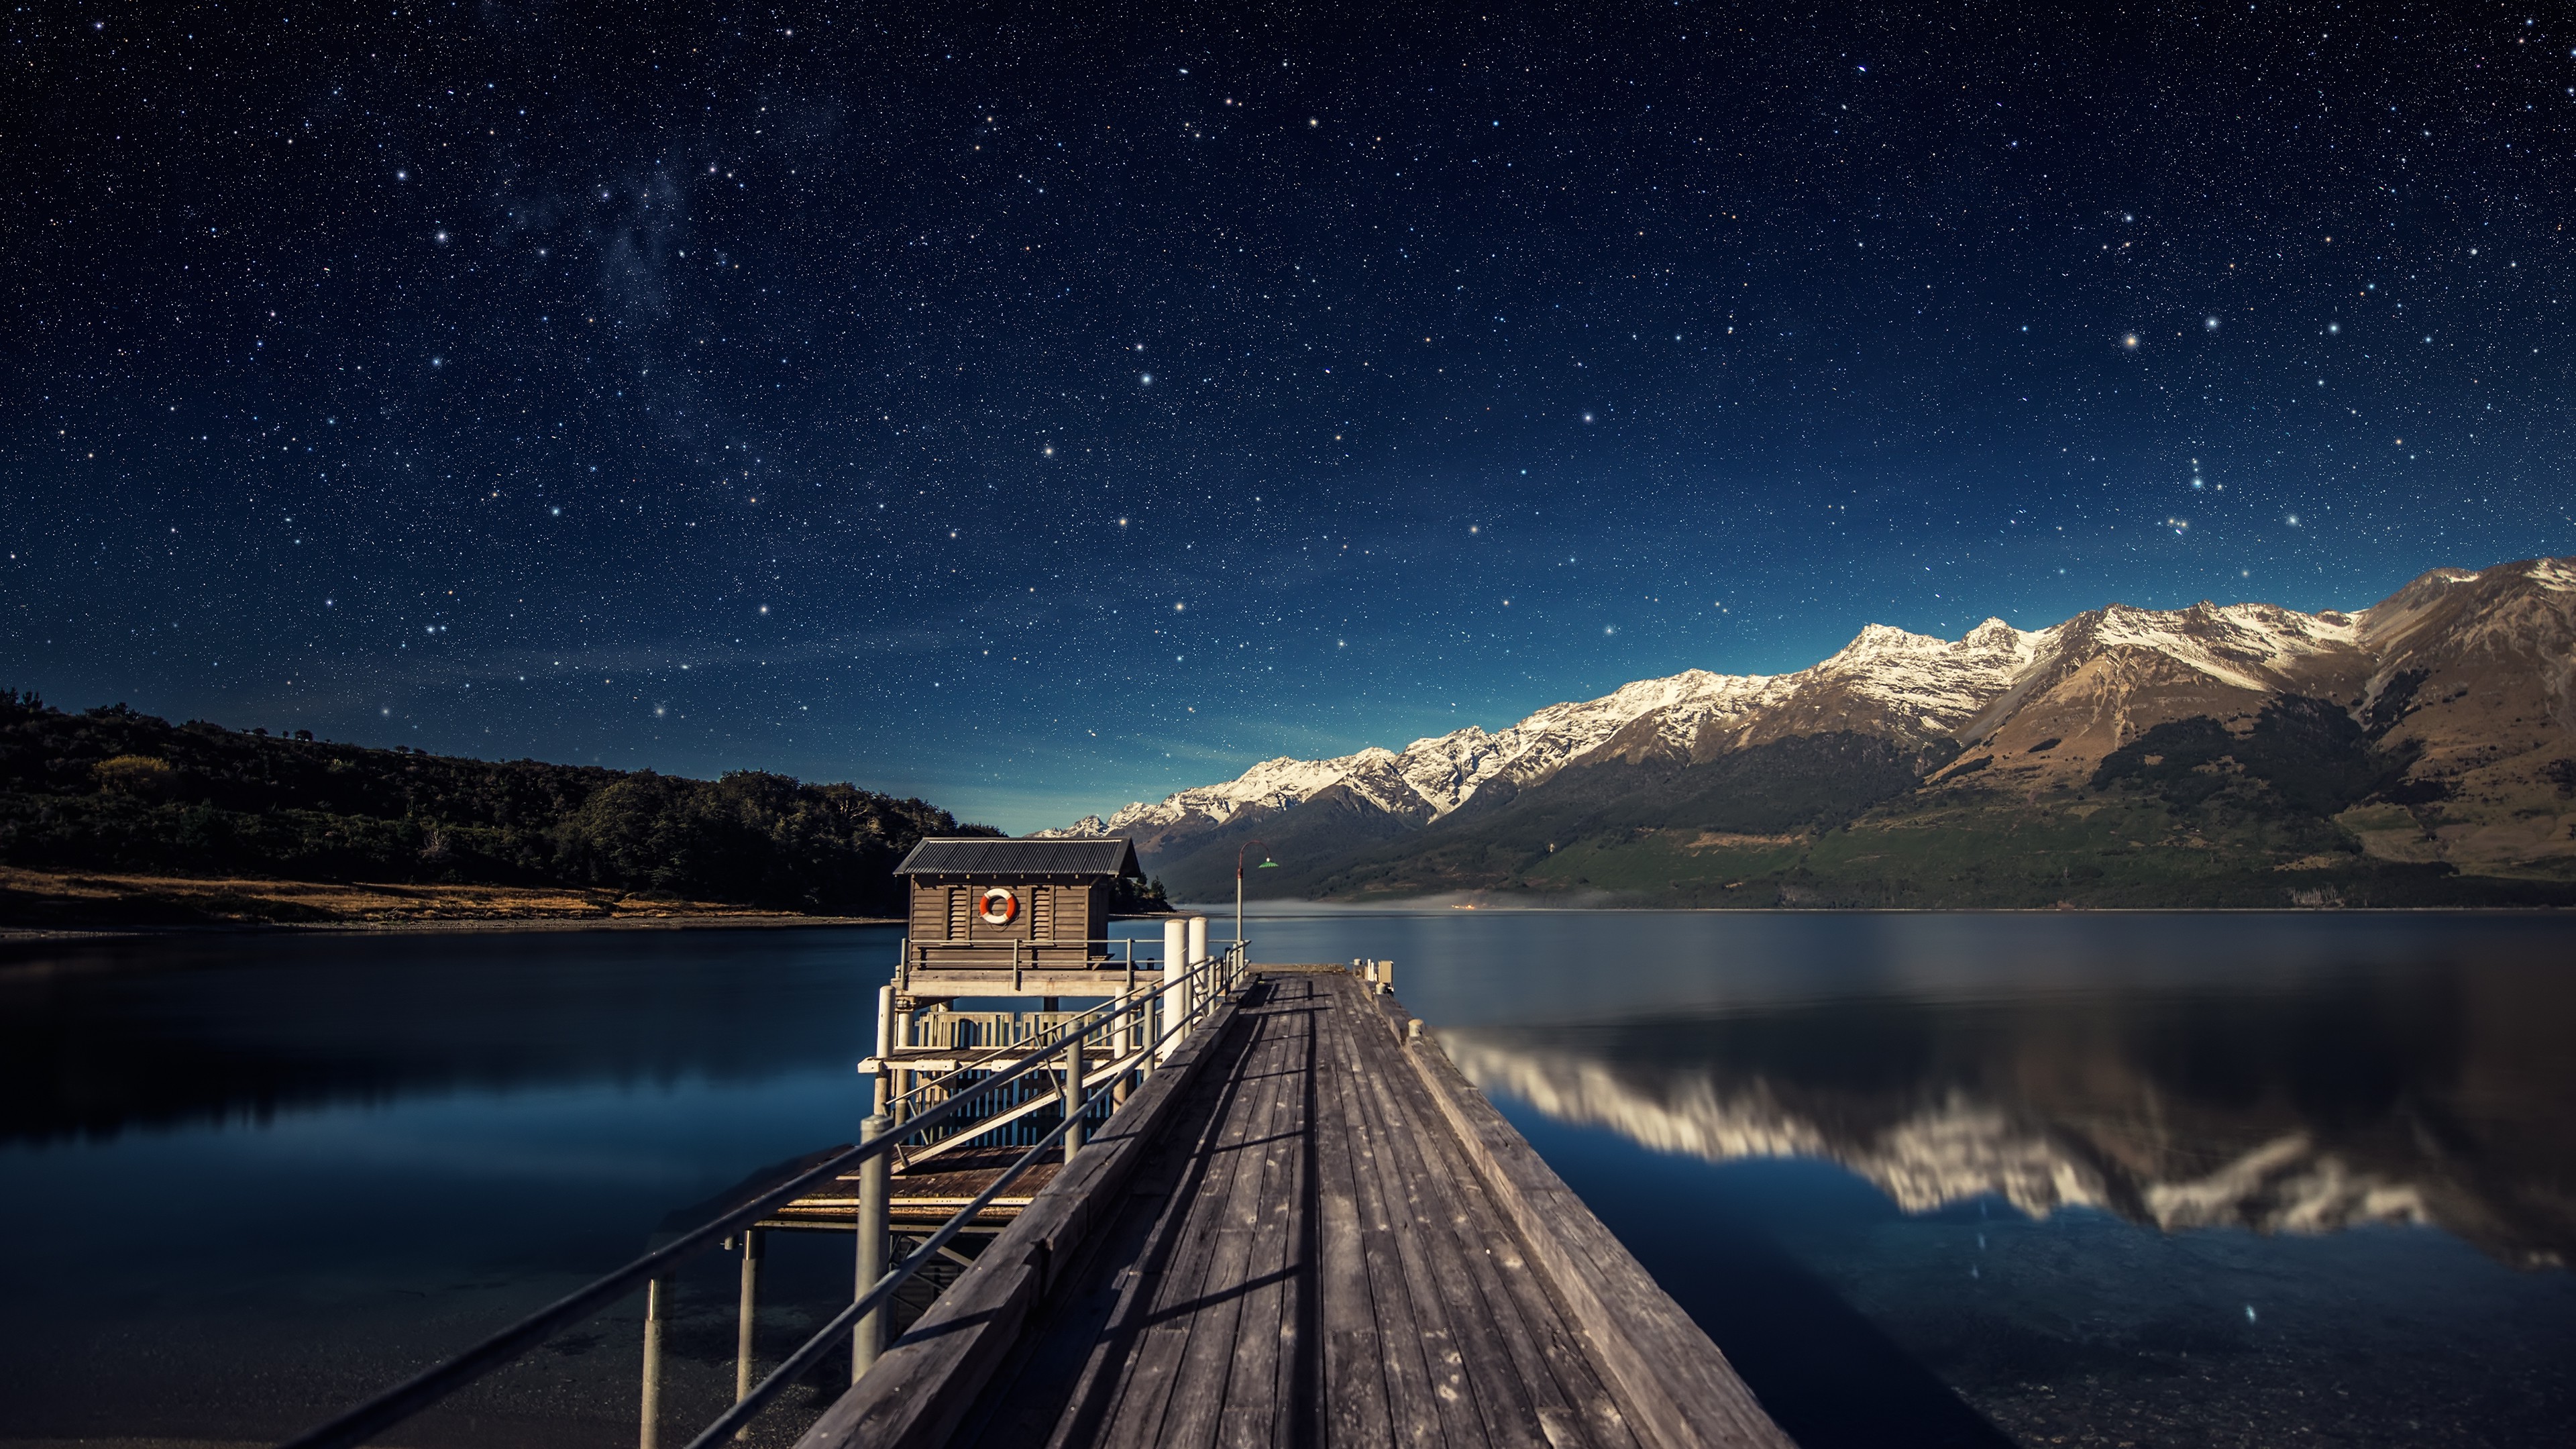 nature, Landscape, Water, Horizon, Lake, Mountain, Snowy Peak, Trees, Forest, Hill, Night, Stars, Pier, Wood, Wooden Surface, House, Reflection, Mist, Shadow Wallpaper